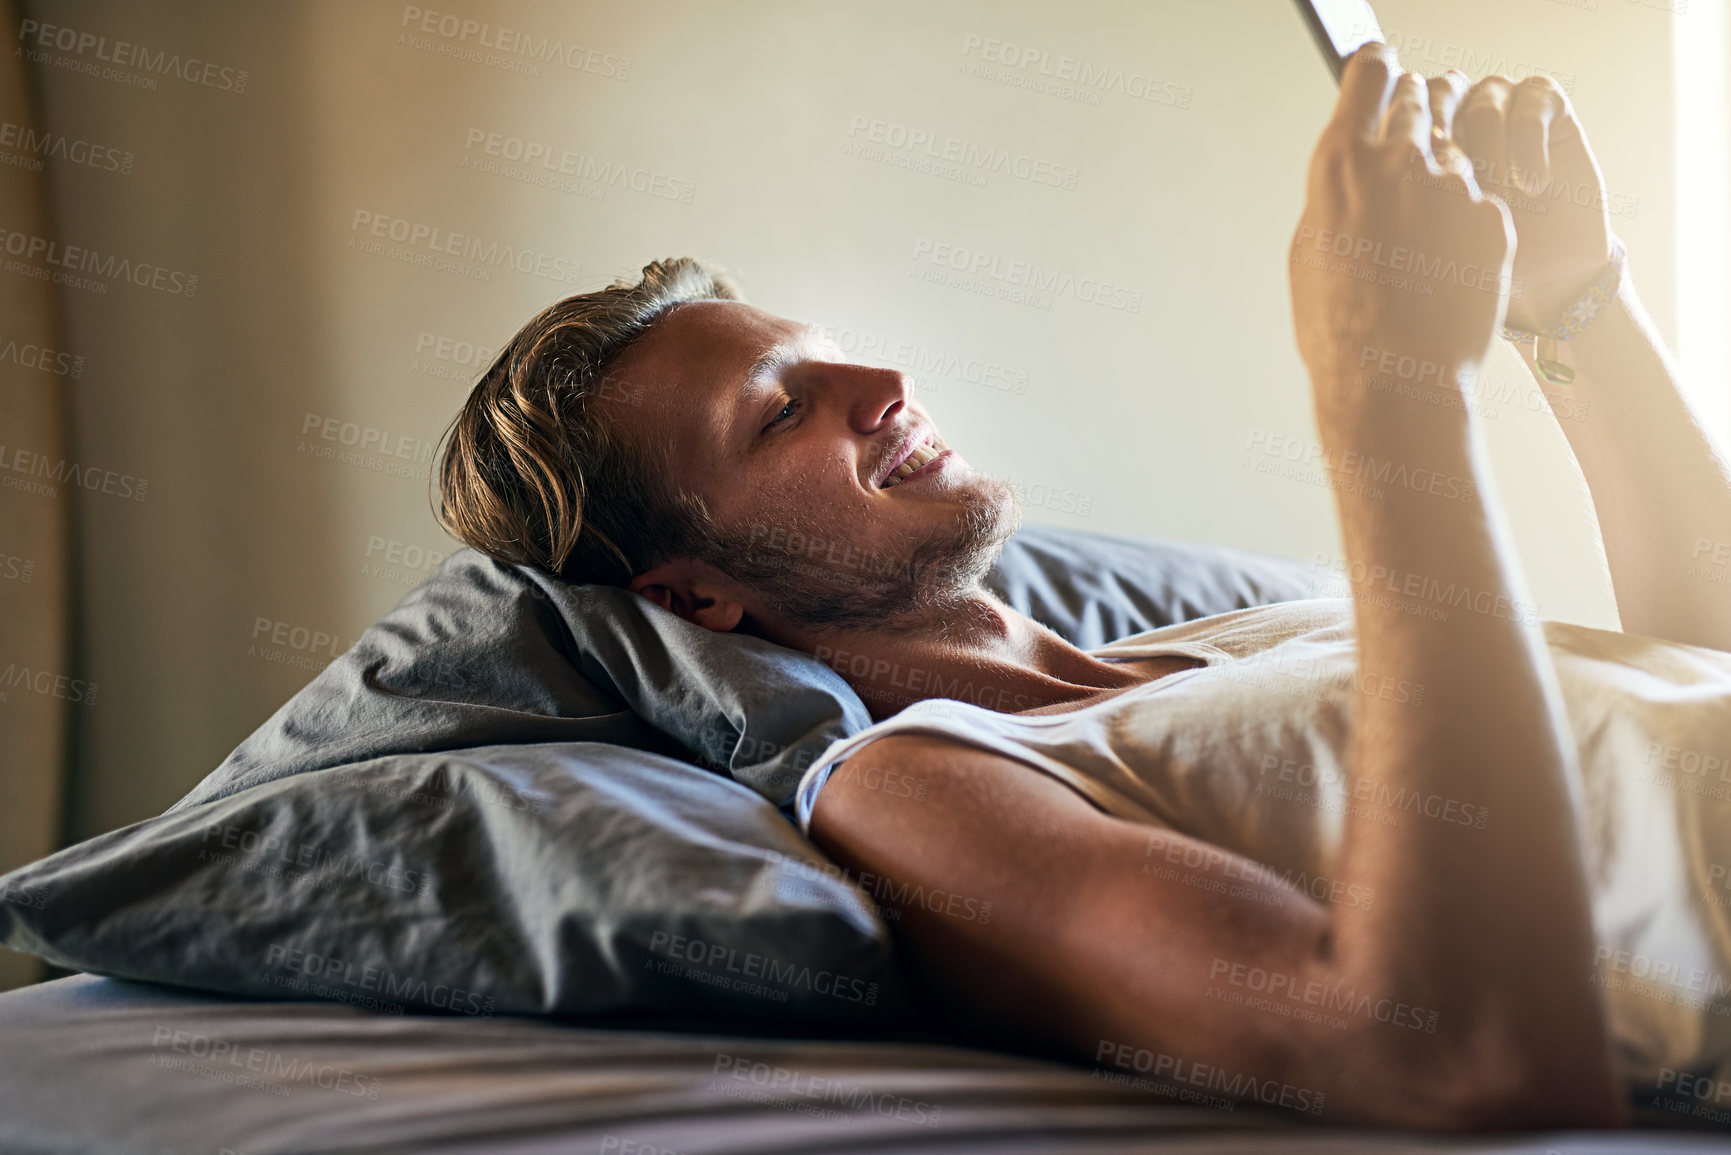 Buy stock photo Cropped shot of a young man texting on his cellphone while lying in bed